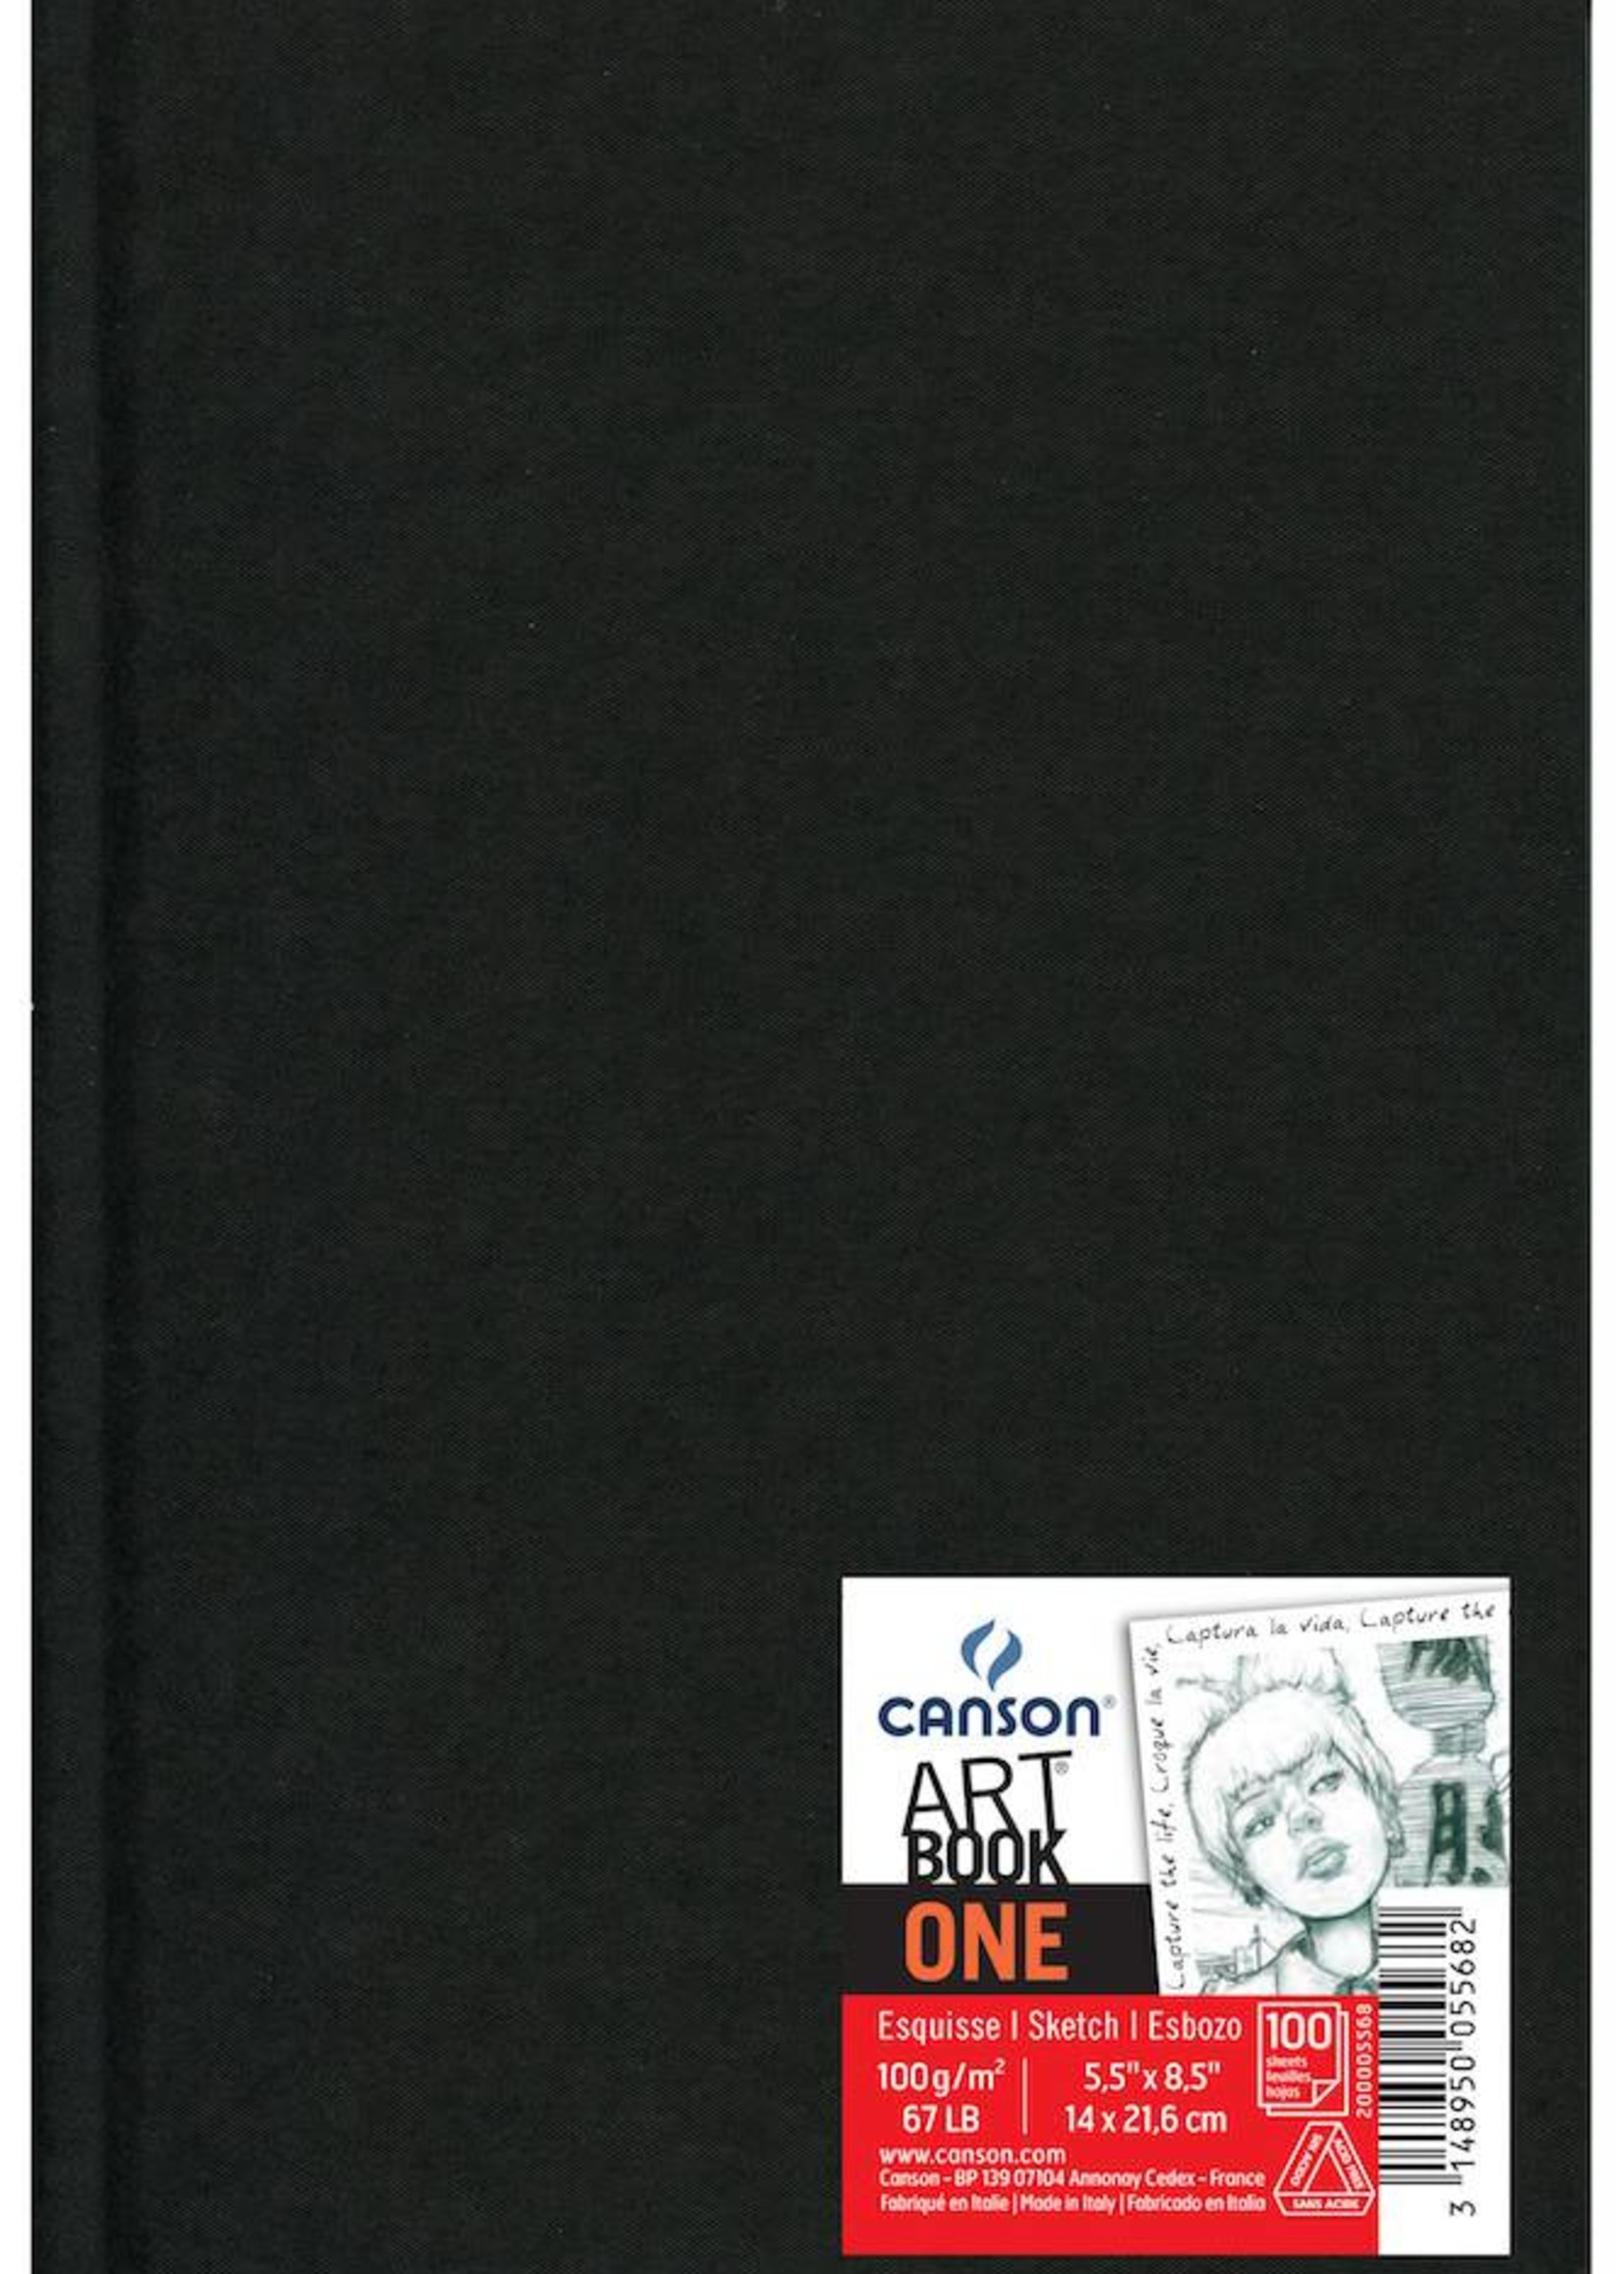 CANSON CANSON ART BOOK ONE 5.5X8.5 67LB HARDBOUND  100/SHT    CAN-200005568